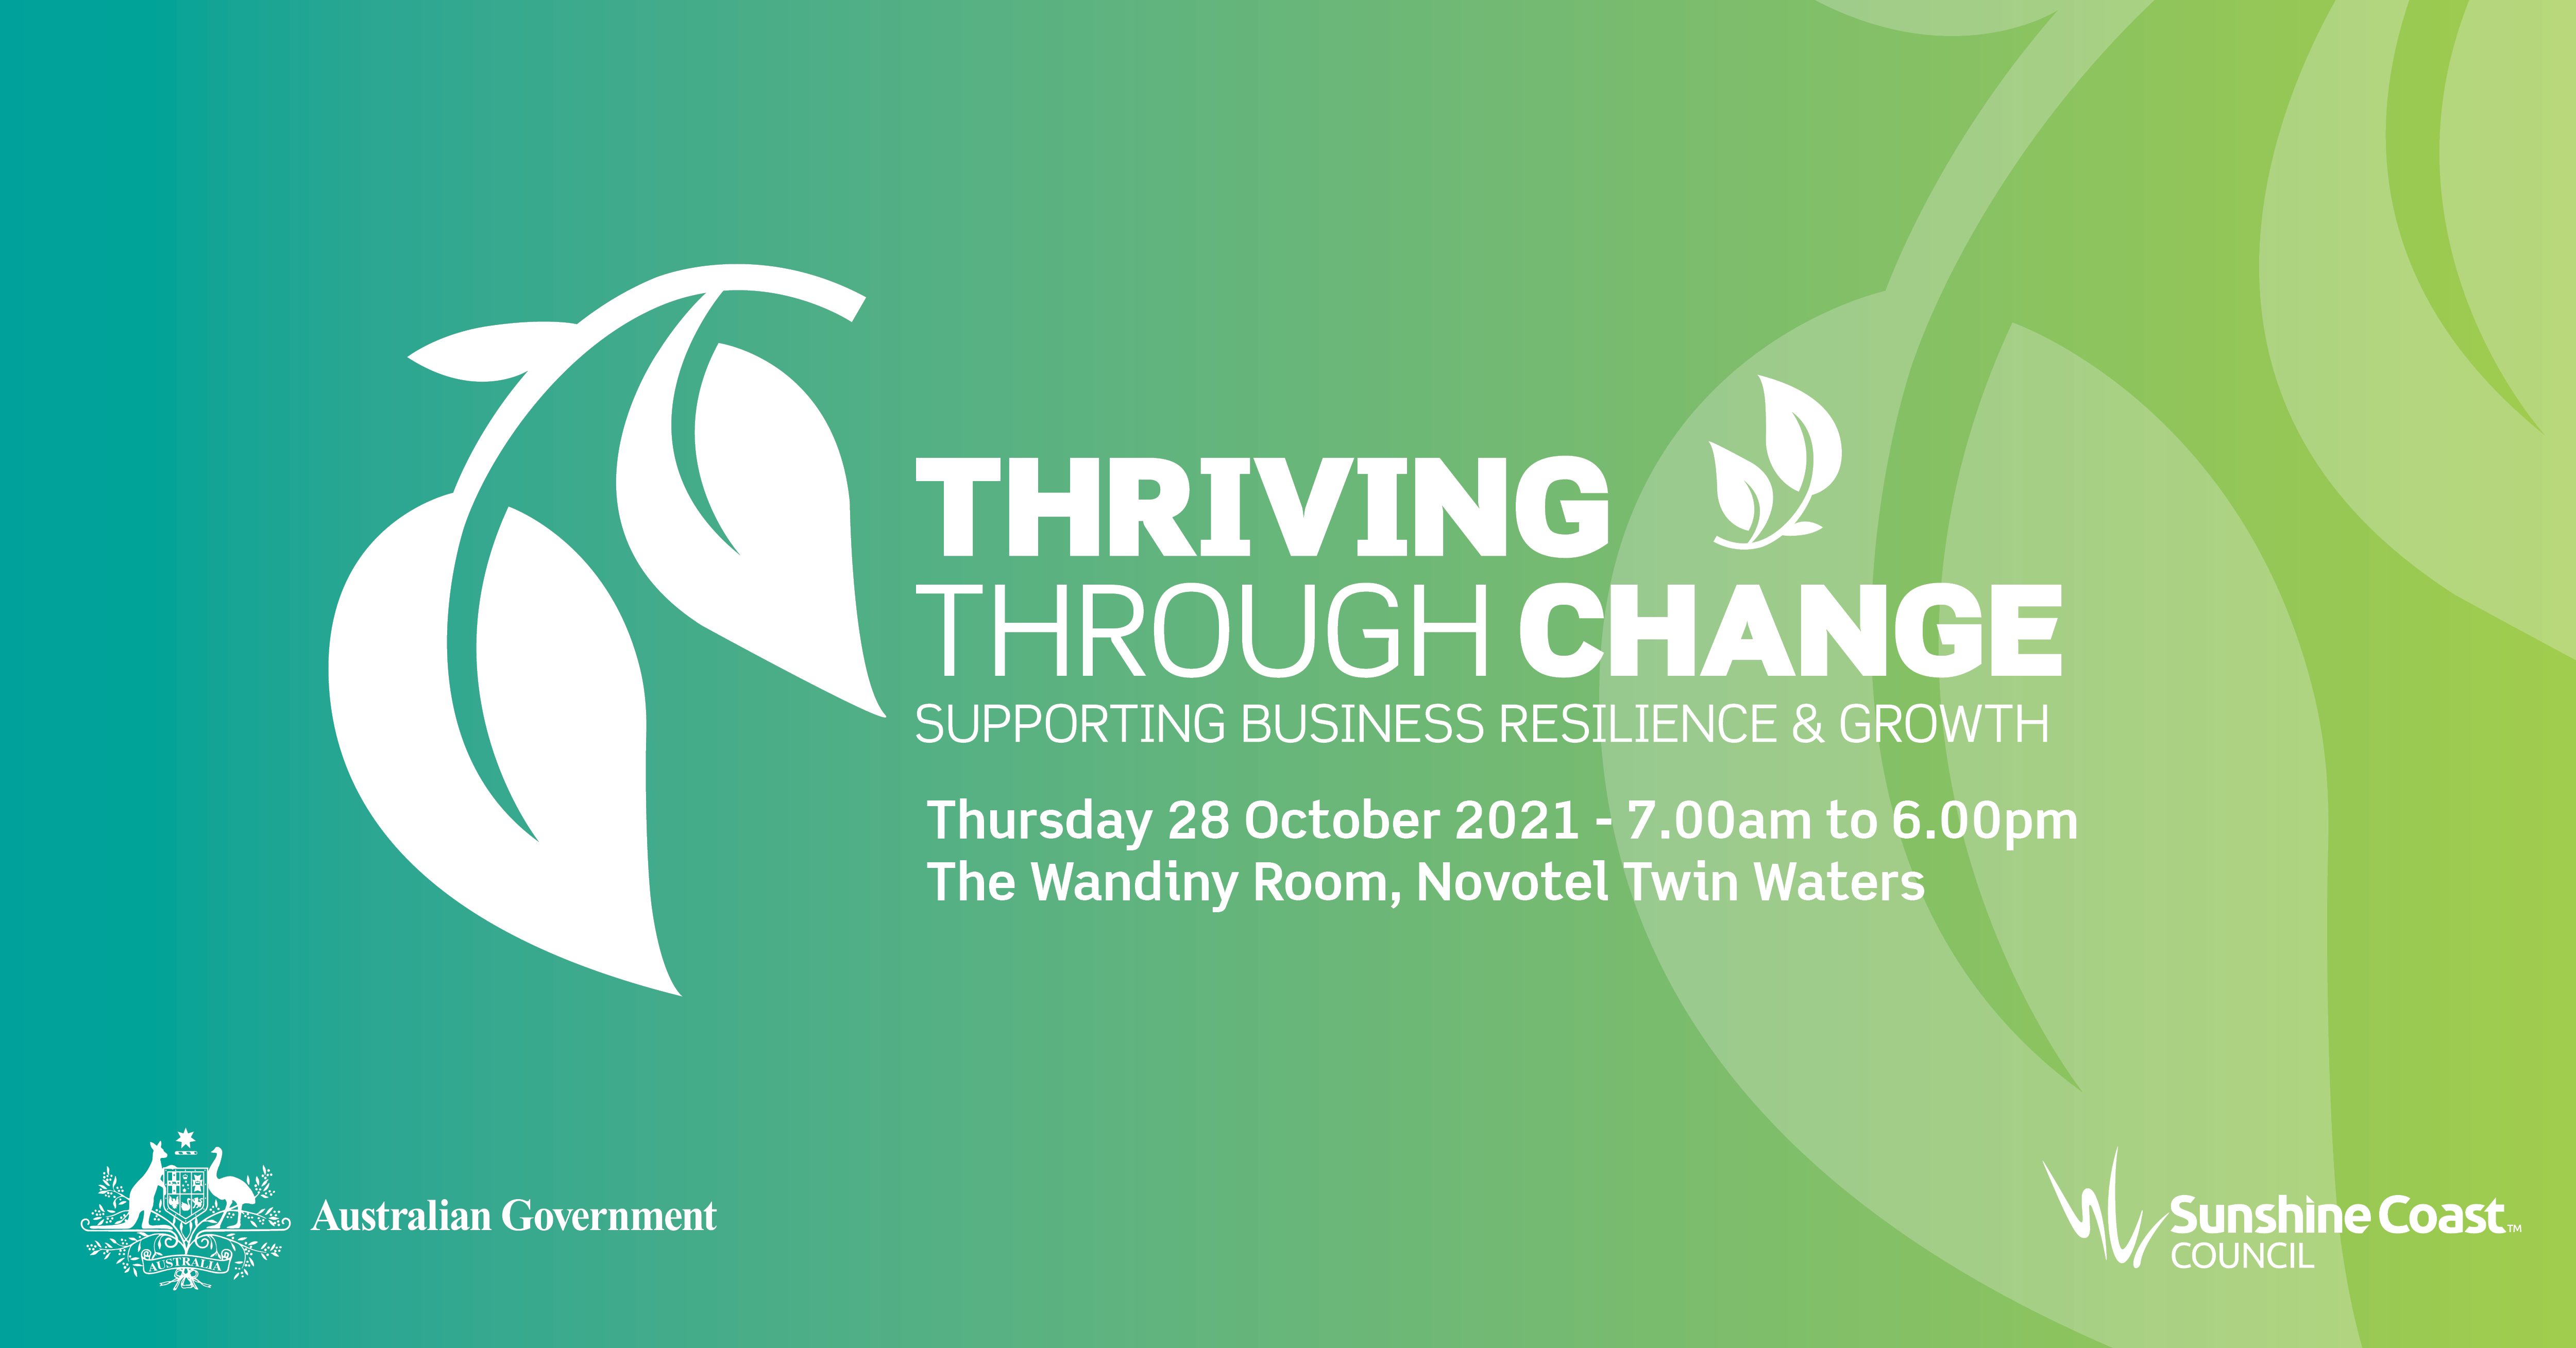 210233_Thriving through change FB Event cover